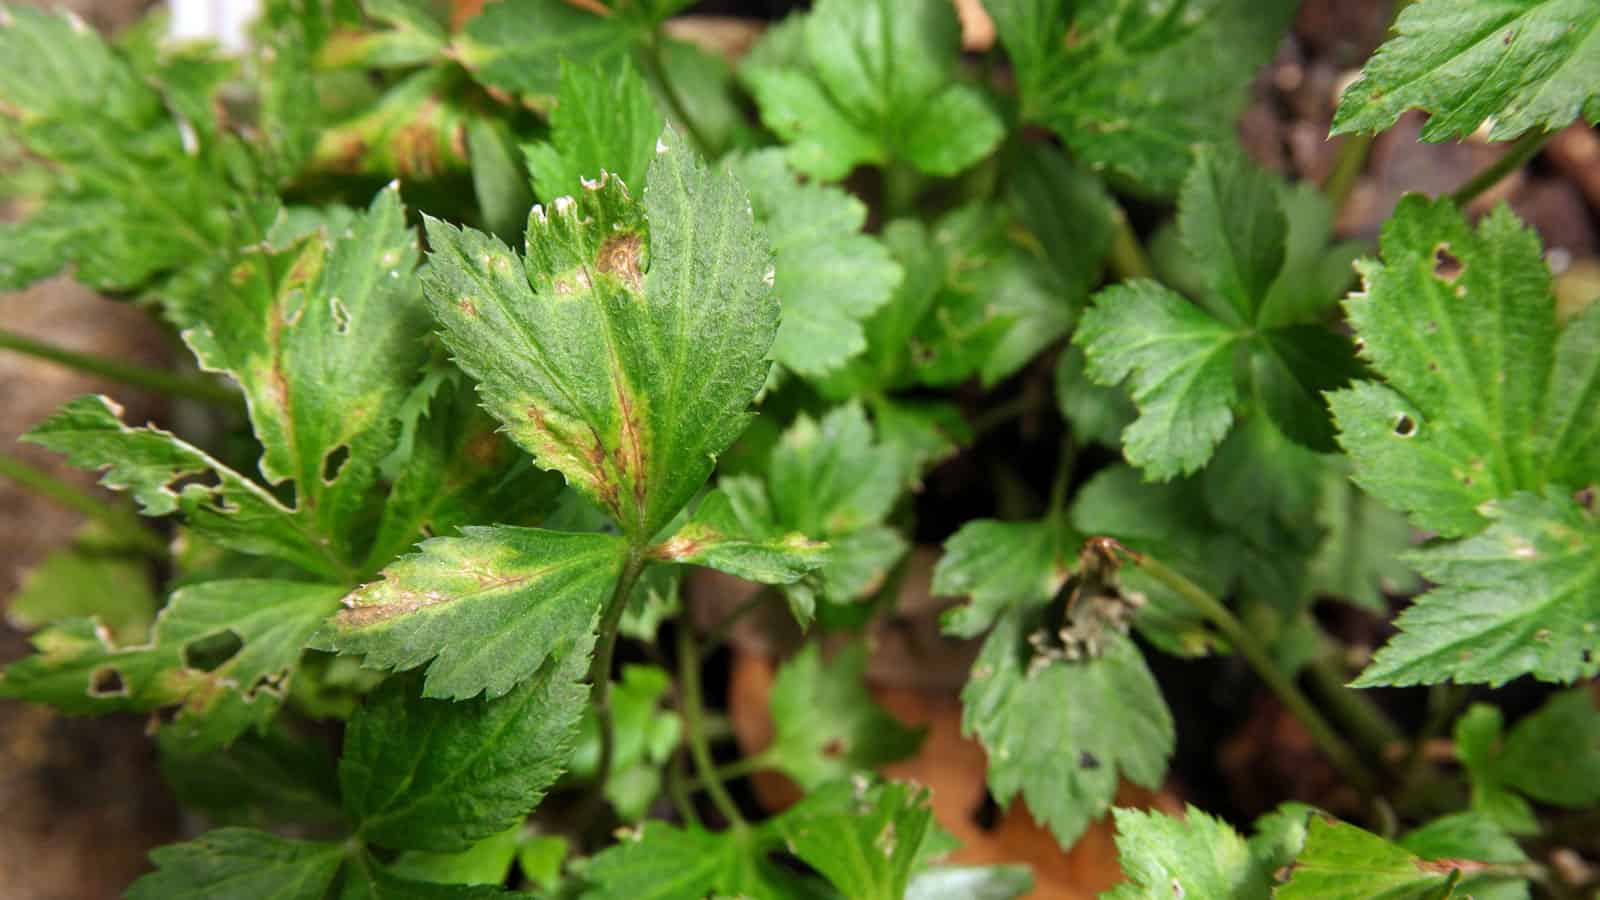 Basil leaves infected with disease causing drooping leaves